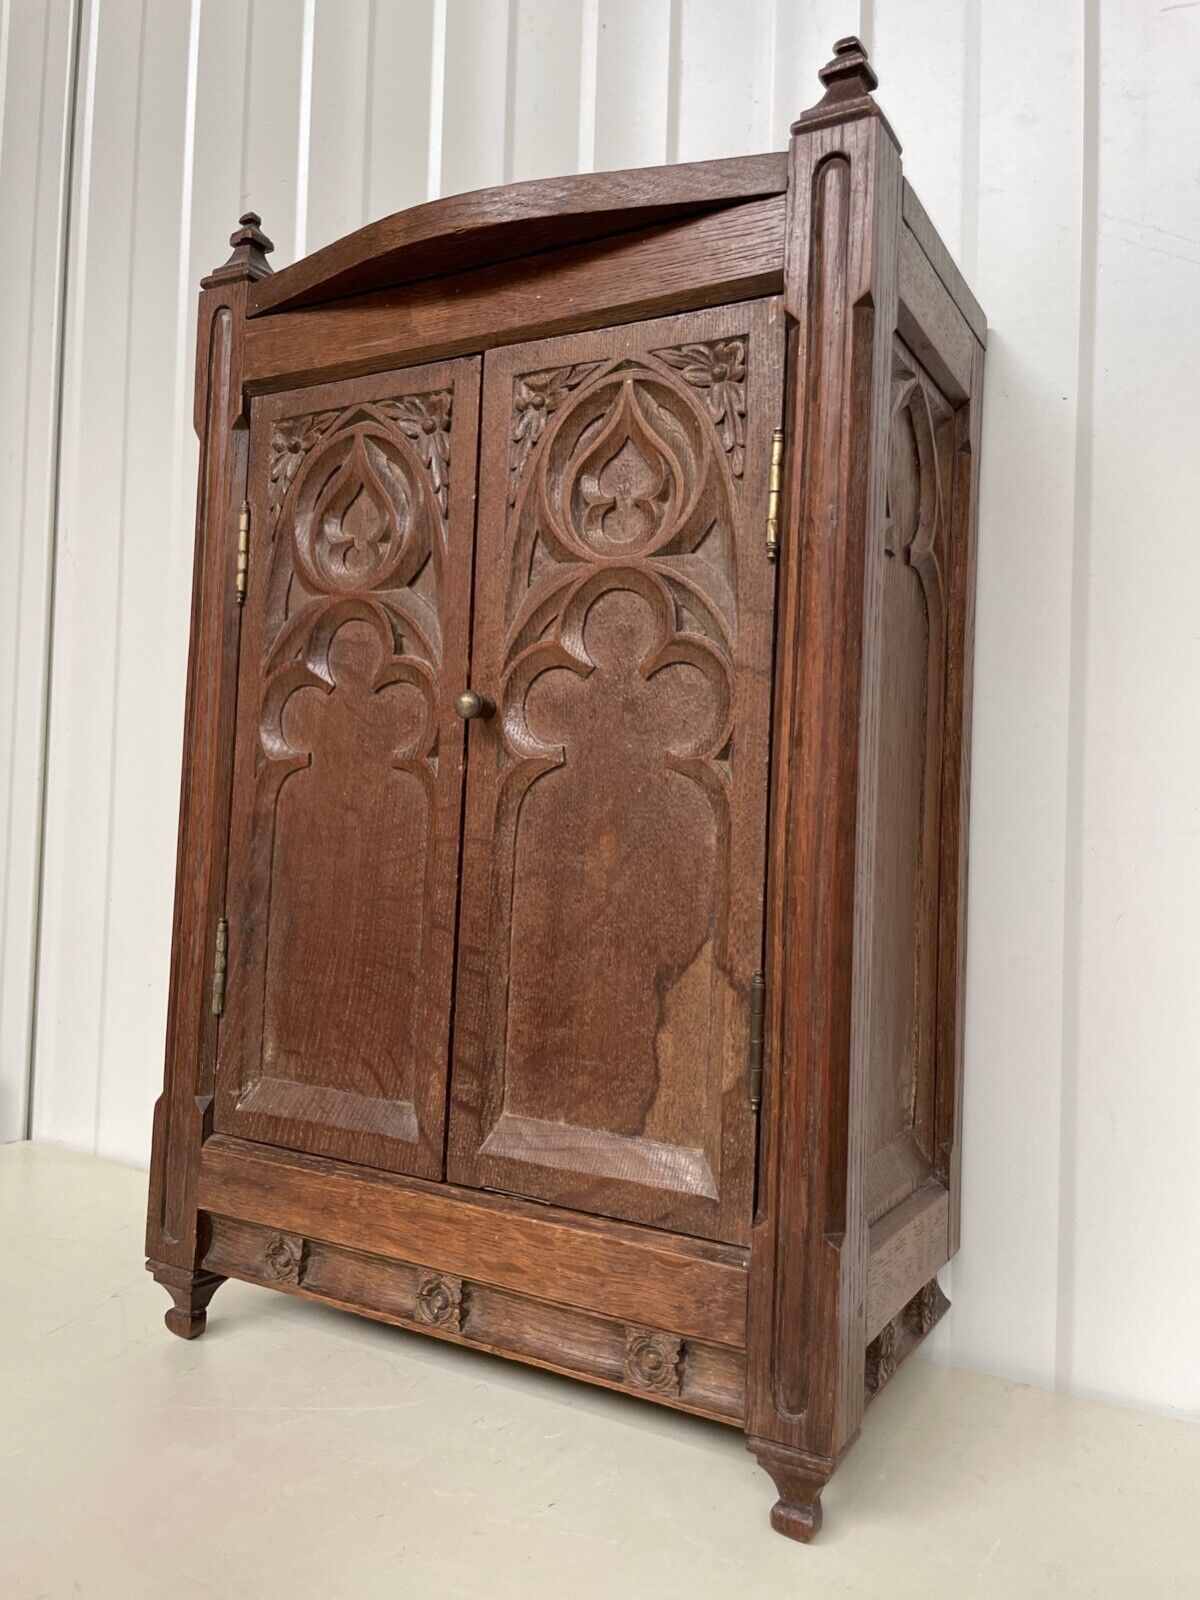 SALE Rare French Gothic Revival Wall Cabinet in oak circa 1900